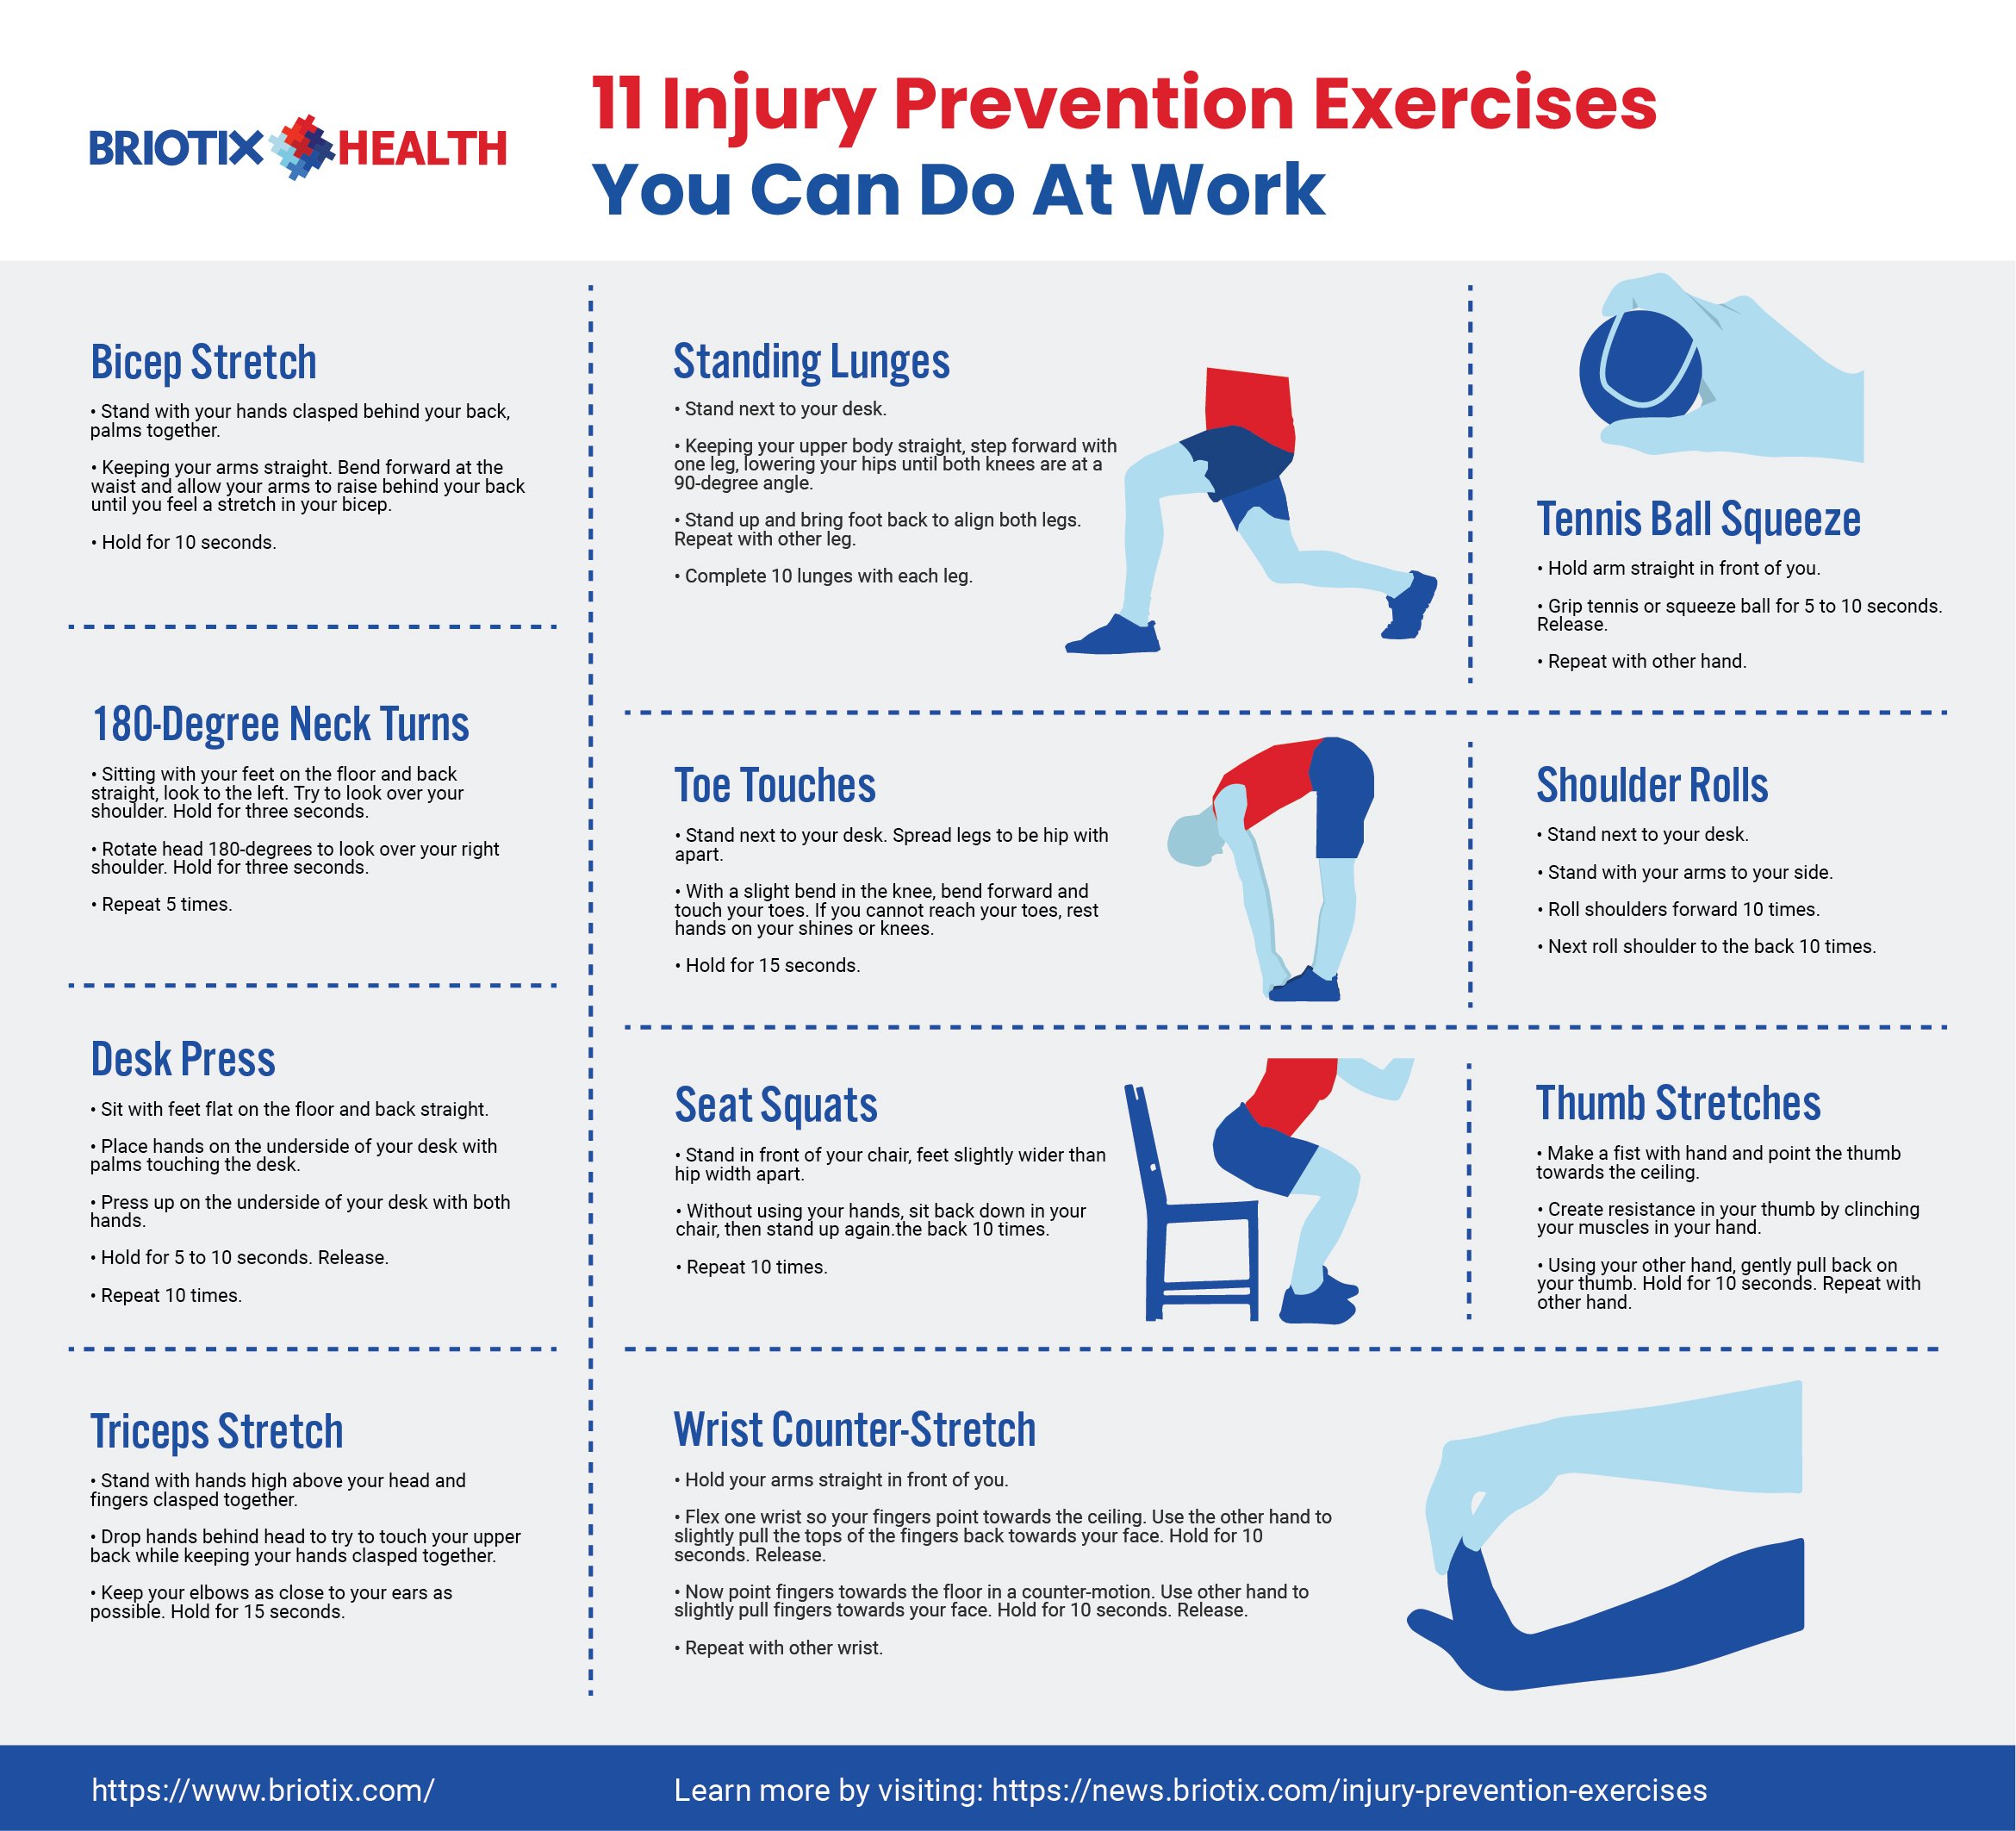 11 Injury Prevention Exercises You Can Do At Work